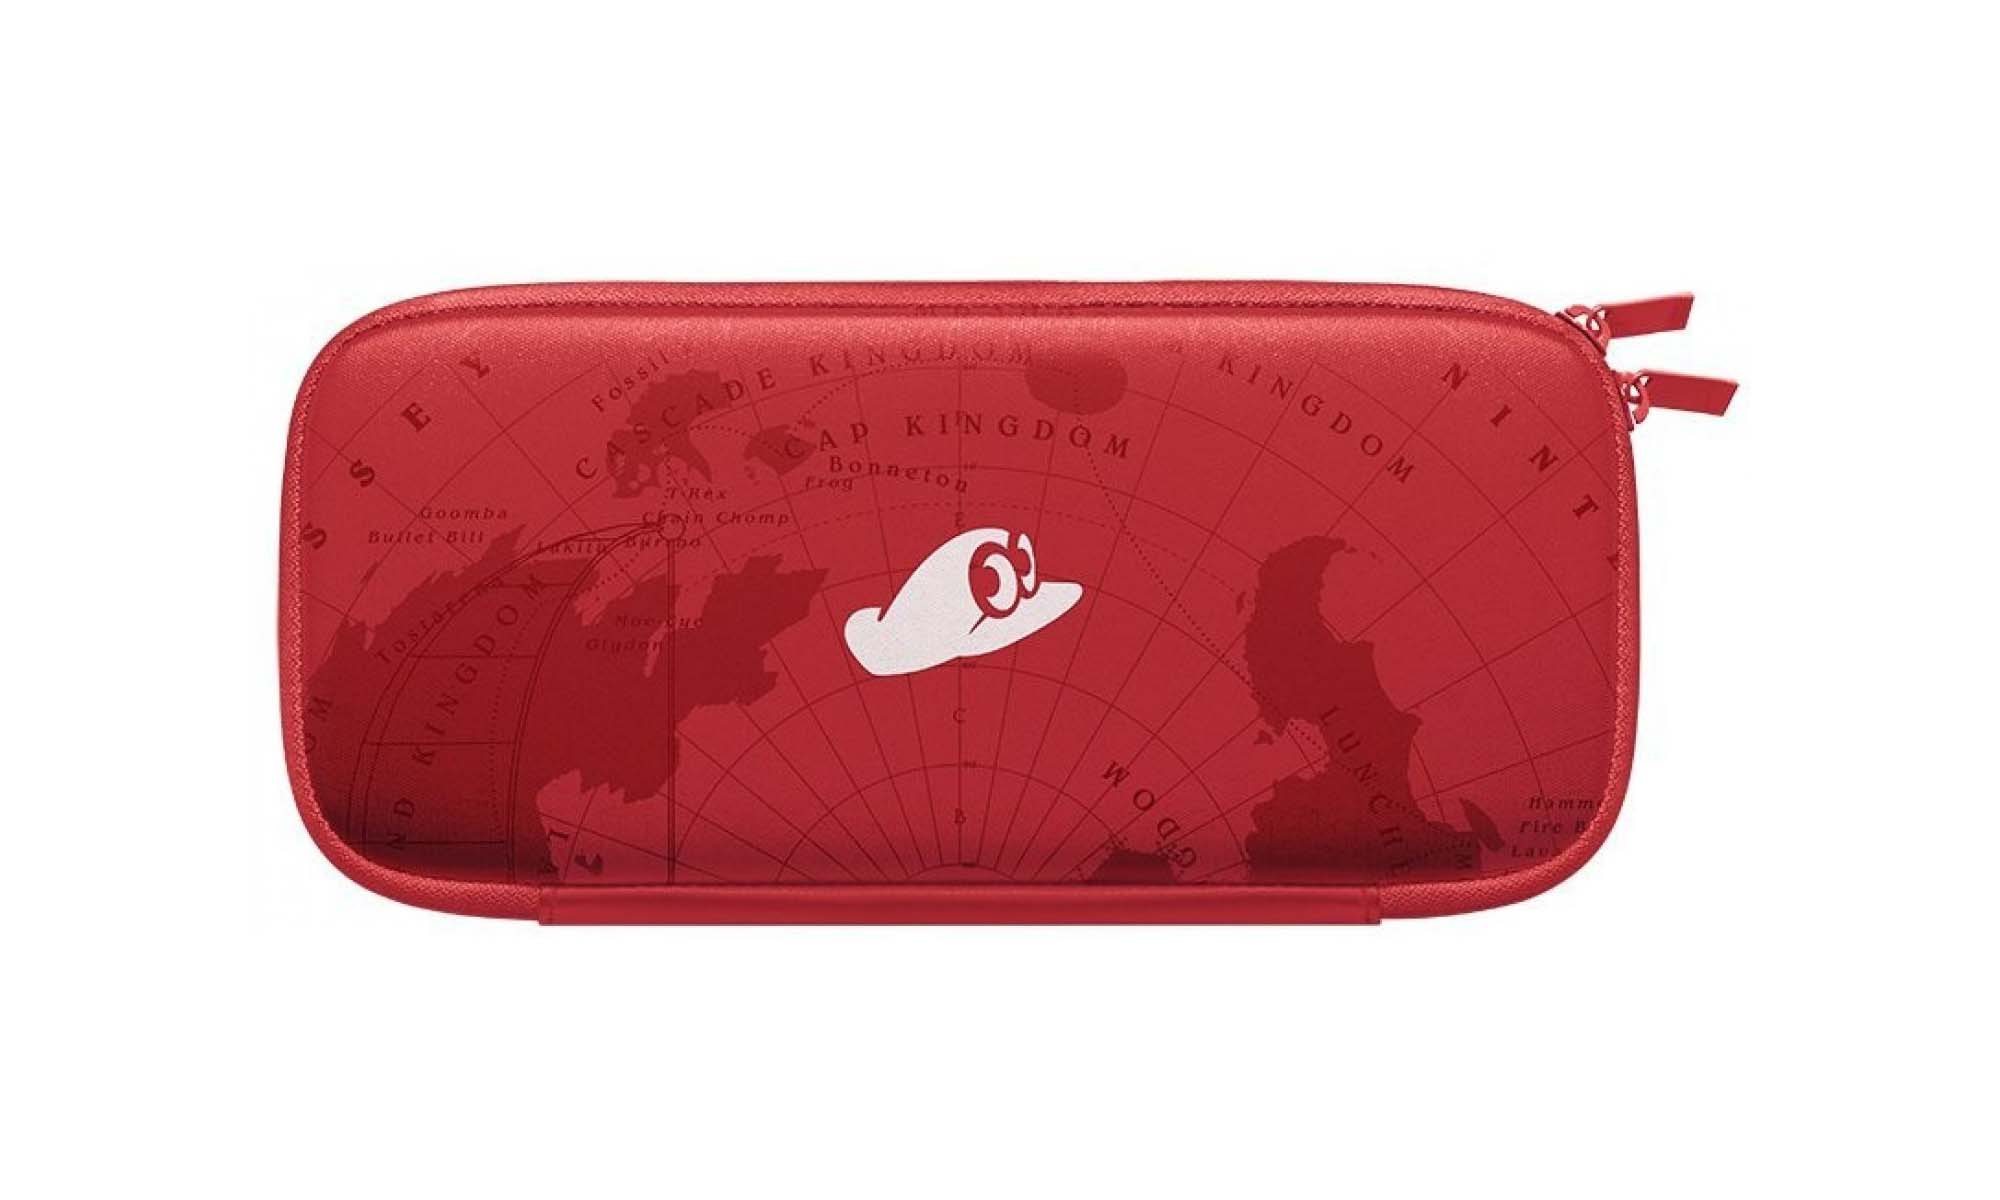 What’s in the Box?! – Super Mario Odyssey Carrying Case for Nintendo Switch